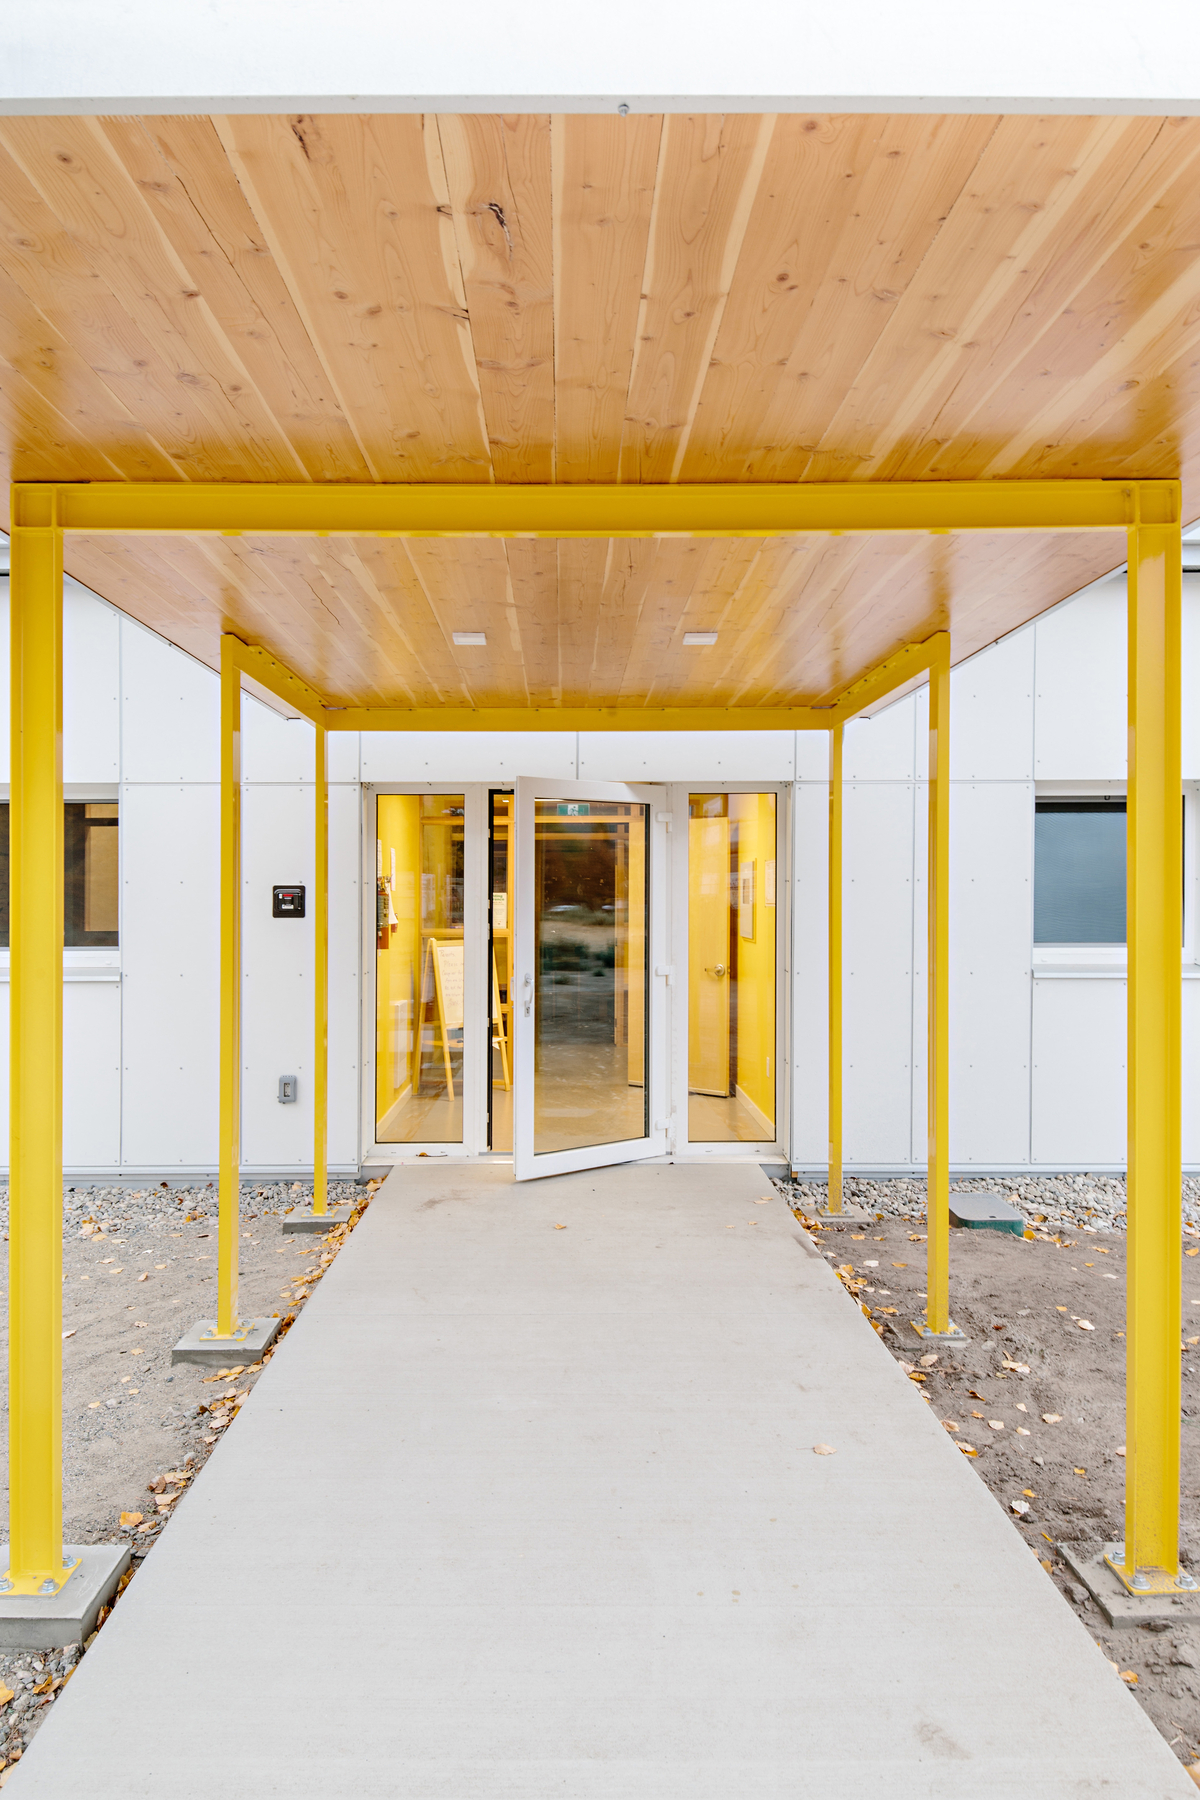 Exterior cloudy daytime view of low rise Okanagan College Child Care Centre entrance with yellow painted steel supports showing hybrid construction with light frame and mass timber construction, including wood covered entranceway